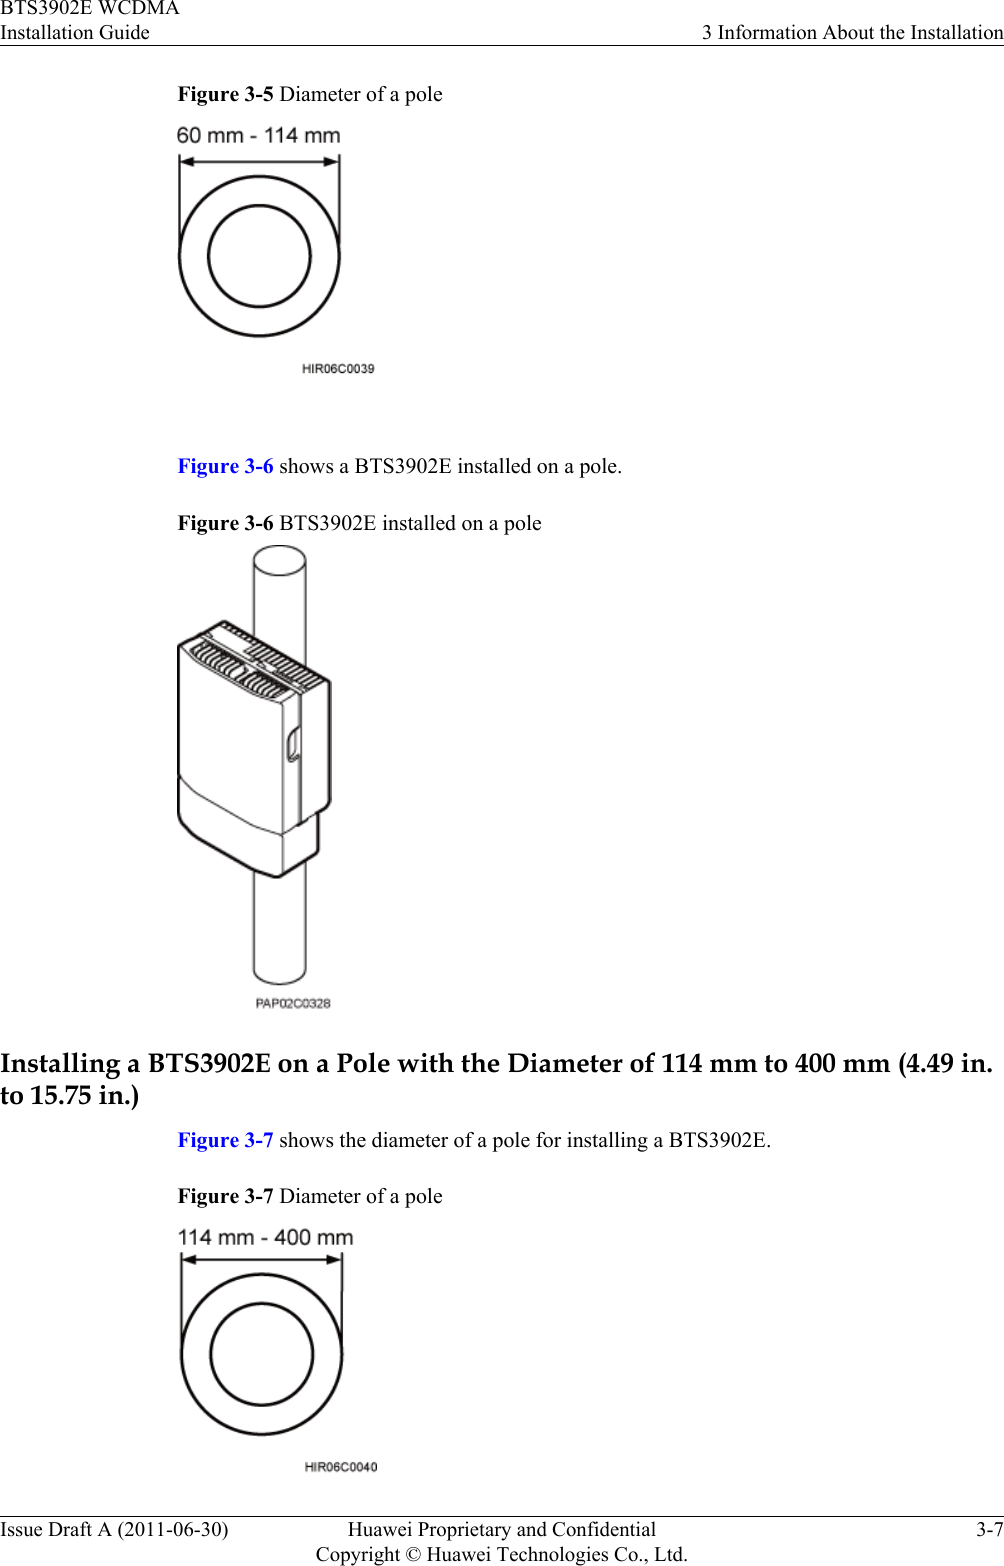 Figure 3-5 Diameter of a pole Figure 3-6 shows a BTS3902E installed on a pole.Figure 3-6 BTS3902E installed on a poleInstalling a BTS3902E on a Pole with the Diameter of 114 mm to 400 mm (4.49 in.to 15.75 in.)Figure 3-7 shows the diameter of a pole for installing a BTS3902E.Figure 3-7 Diameter of a poleBTS3902E WCDMAInstallation Guide 3 Information About the InstallationIssue Draft A (2011-06-30) Huawei Proprietary and ConfidentialCopyright © Huawei Technologies Co., Ltd.3-7